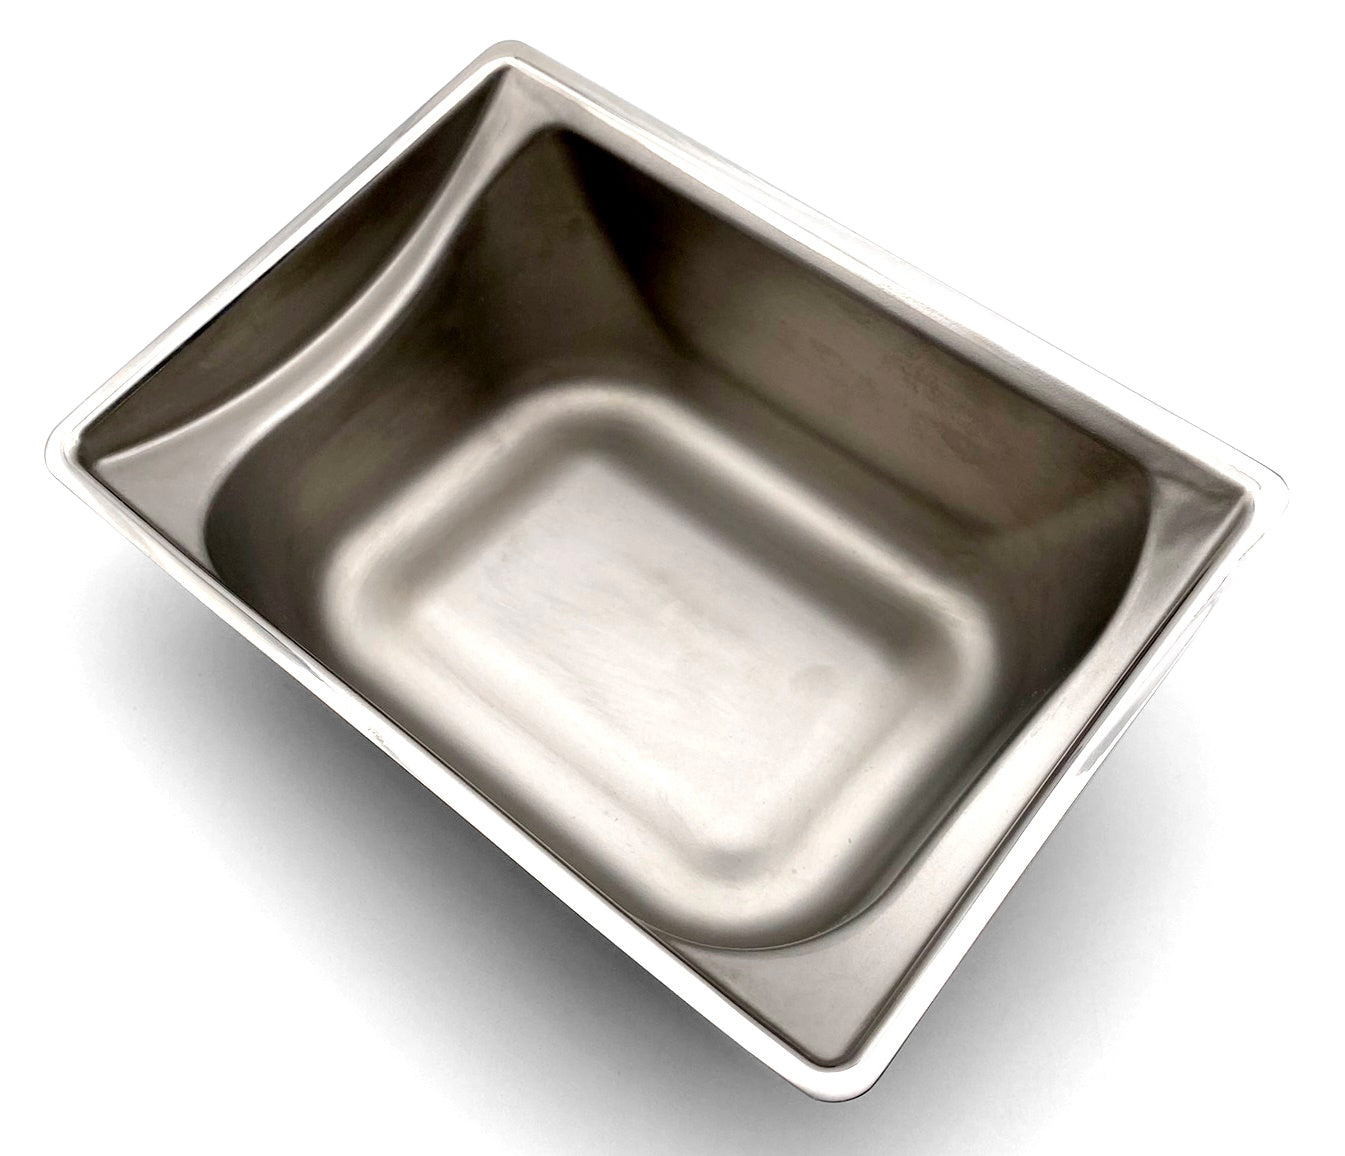 Stainless Steel Bowl Inserts x 2 for Closer Pets MiBowl Automatic Microchip Pet Feeder (CP504)